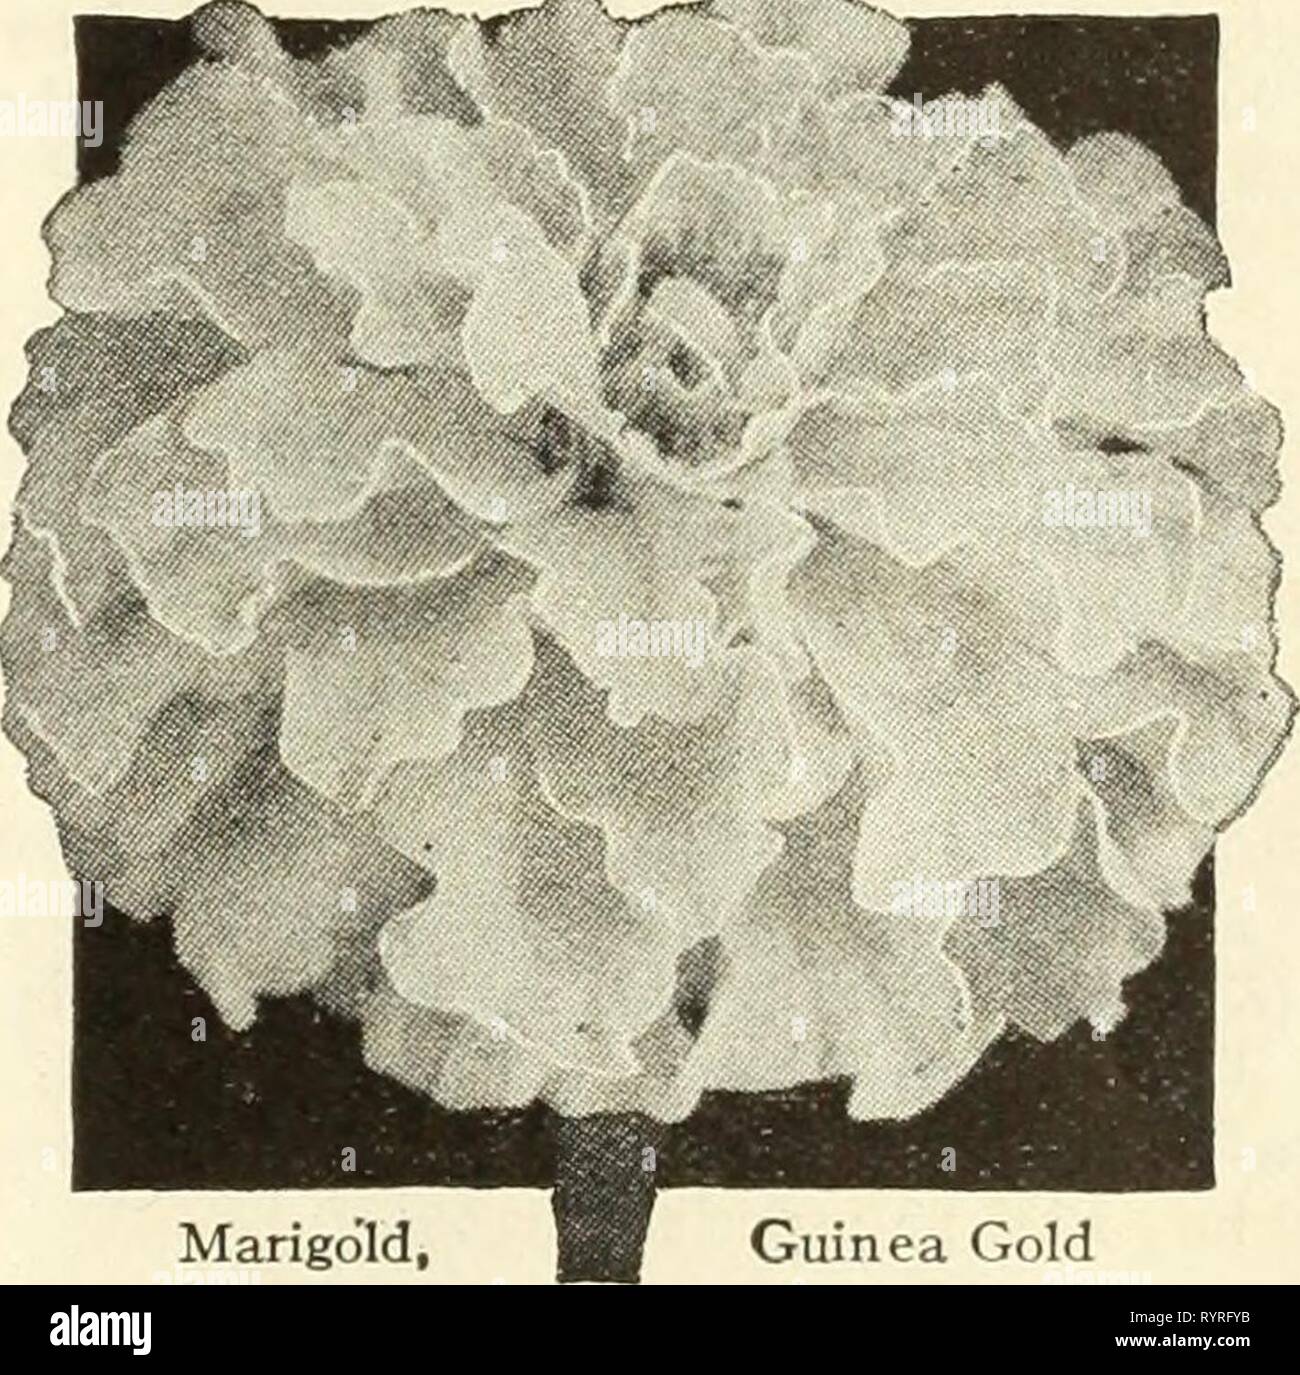 Dreer's midsummer list 1934 (1934) Dreer's midsummer list 1934 . dreersmidsummerl1934henr Year: 1934  FLOWER SEEDS FOR THE CONSERVATORY AND GREENHOUSE 19 Didiscus—B/uc Lace Flower ® 2351 CoeruleuS. An interesting annual used extensively for early spring flowering in a cool greenhouse. Exquisite pale lavender blooms in showy umbels. Pkt. 15c; special pkt. 40c. Gerhera—Transvaal Daisy 2535 Jamesoni Hybrids. A most unusual and very beautiful daisy-like flower from South Africa. The blooms measure up to 4 inches across. Includes many lovely shades. Fine for cutting. Pkt. 25c; 100 seeds 75c. Grevil Stock Photo